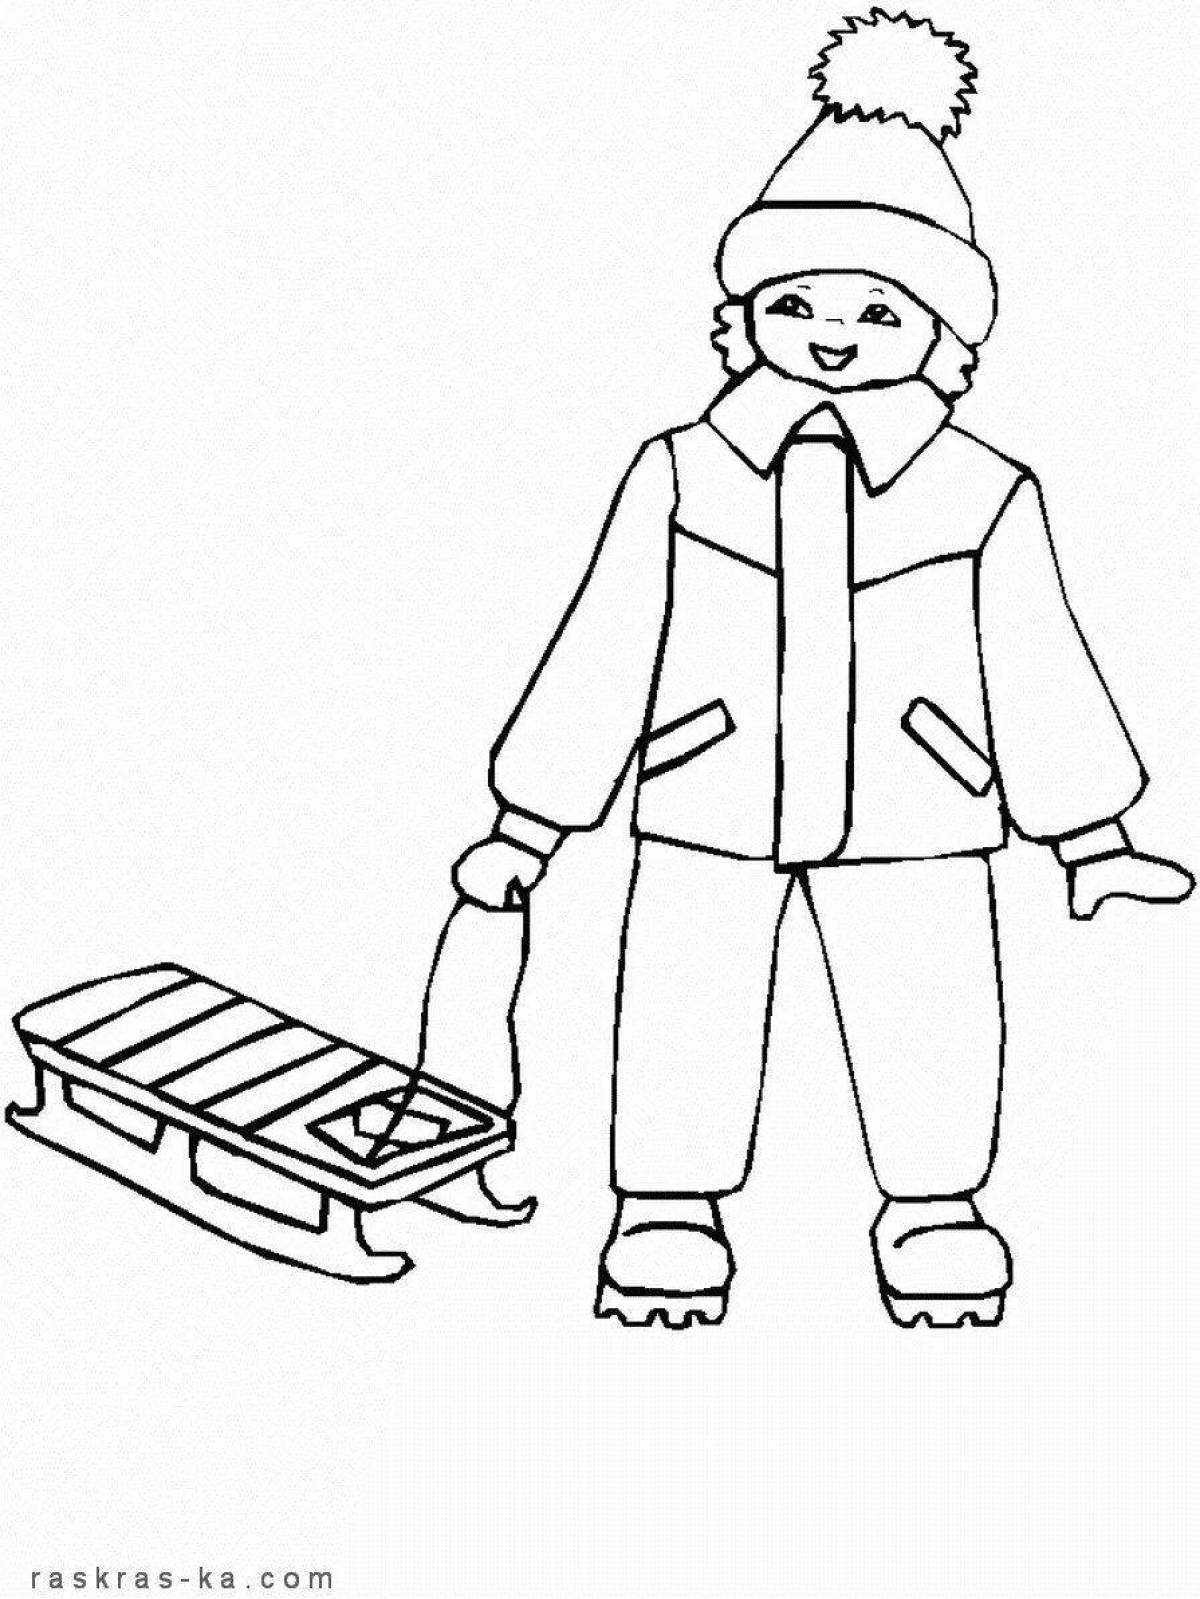 Funny winter clothes coloring book for kids 6-7 years old